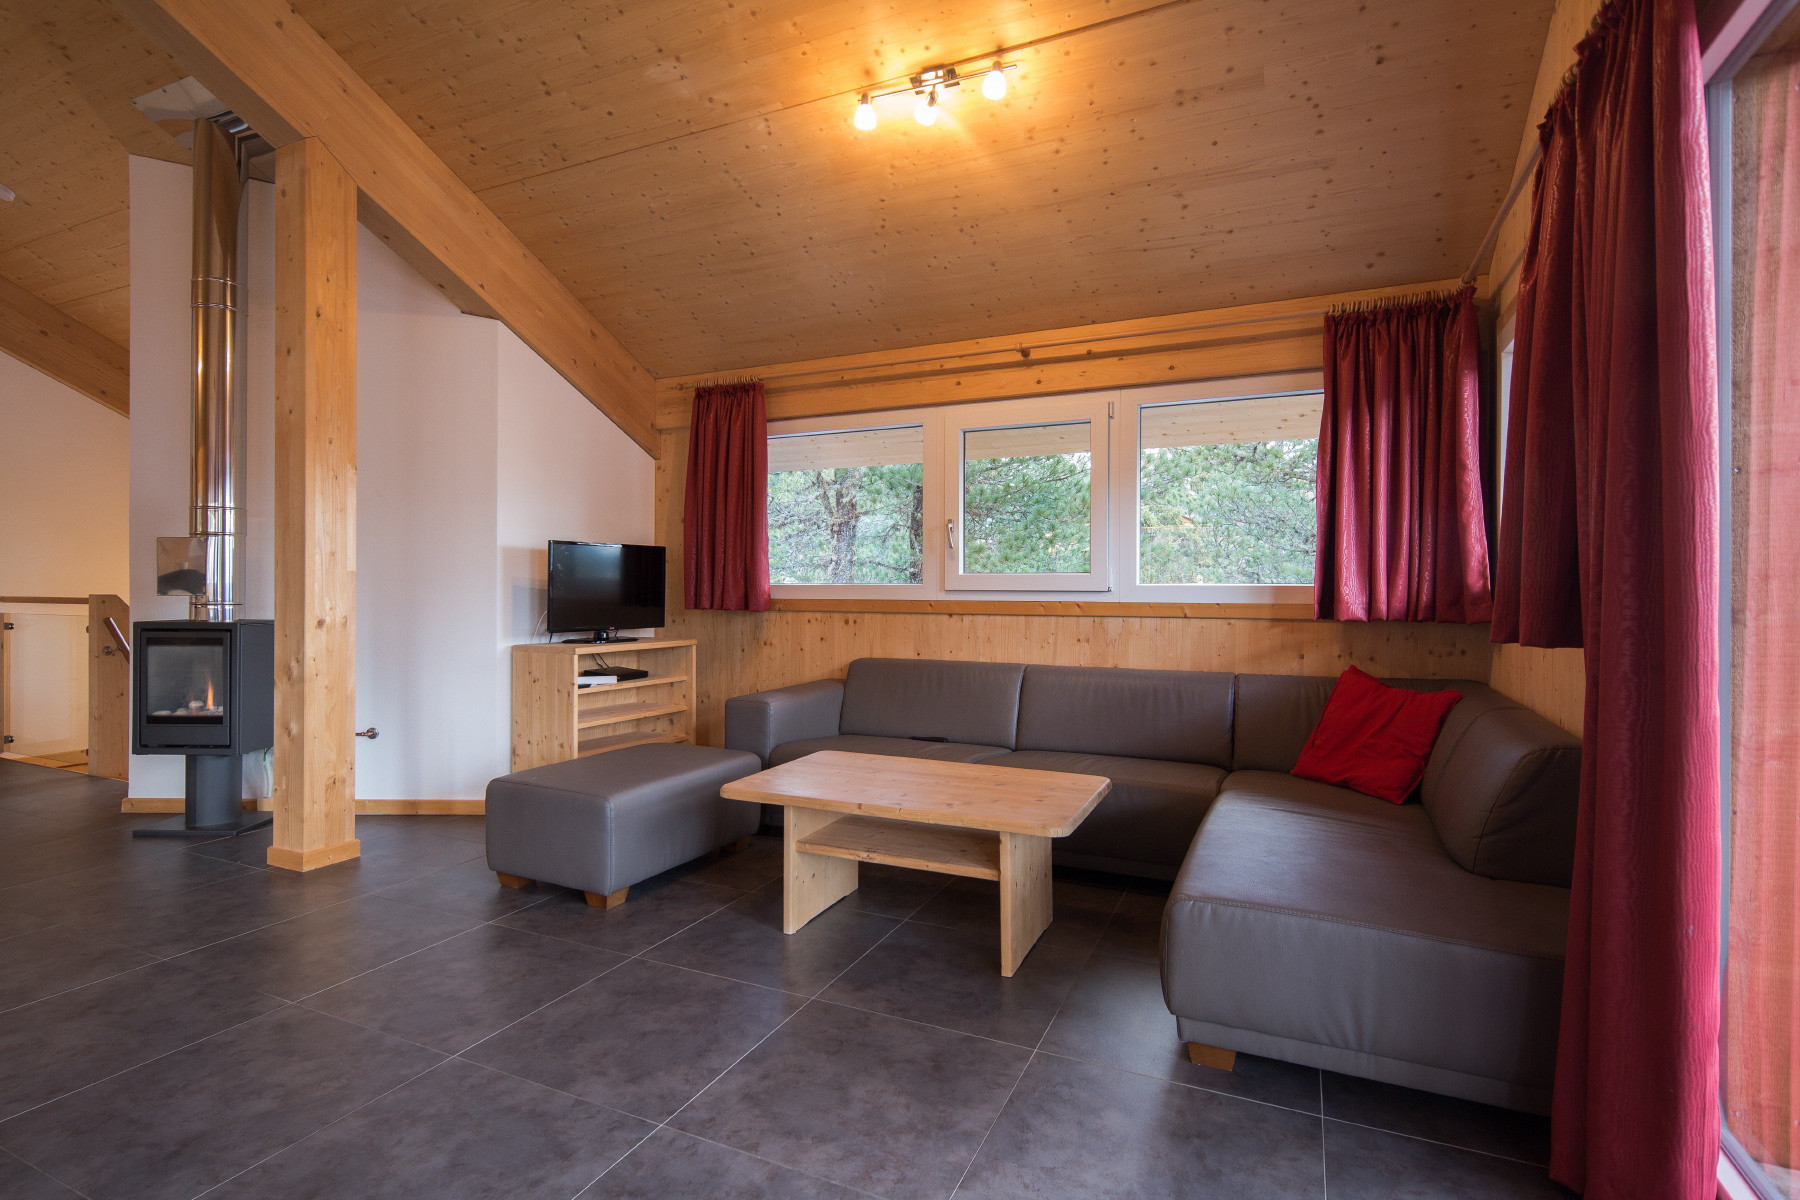  in Turrach - Chalet #31 with IR-sauna and indoor whirlpool